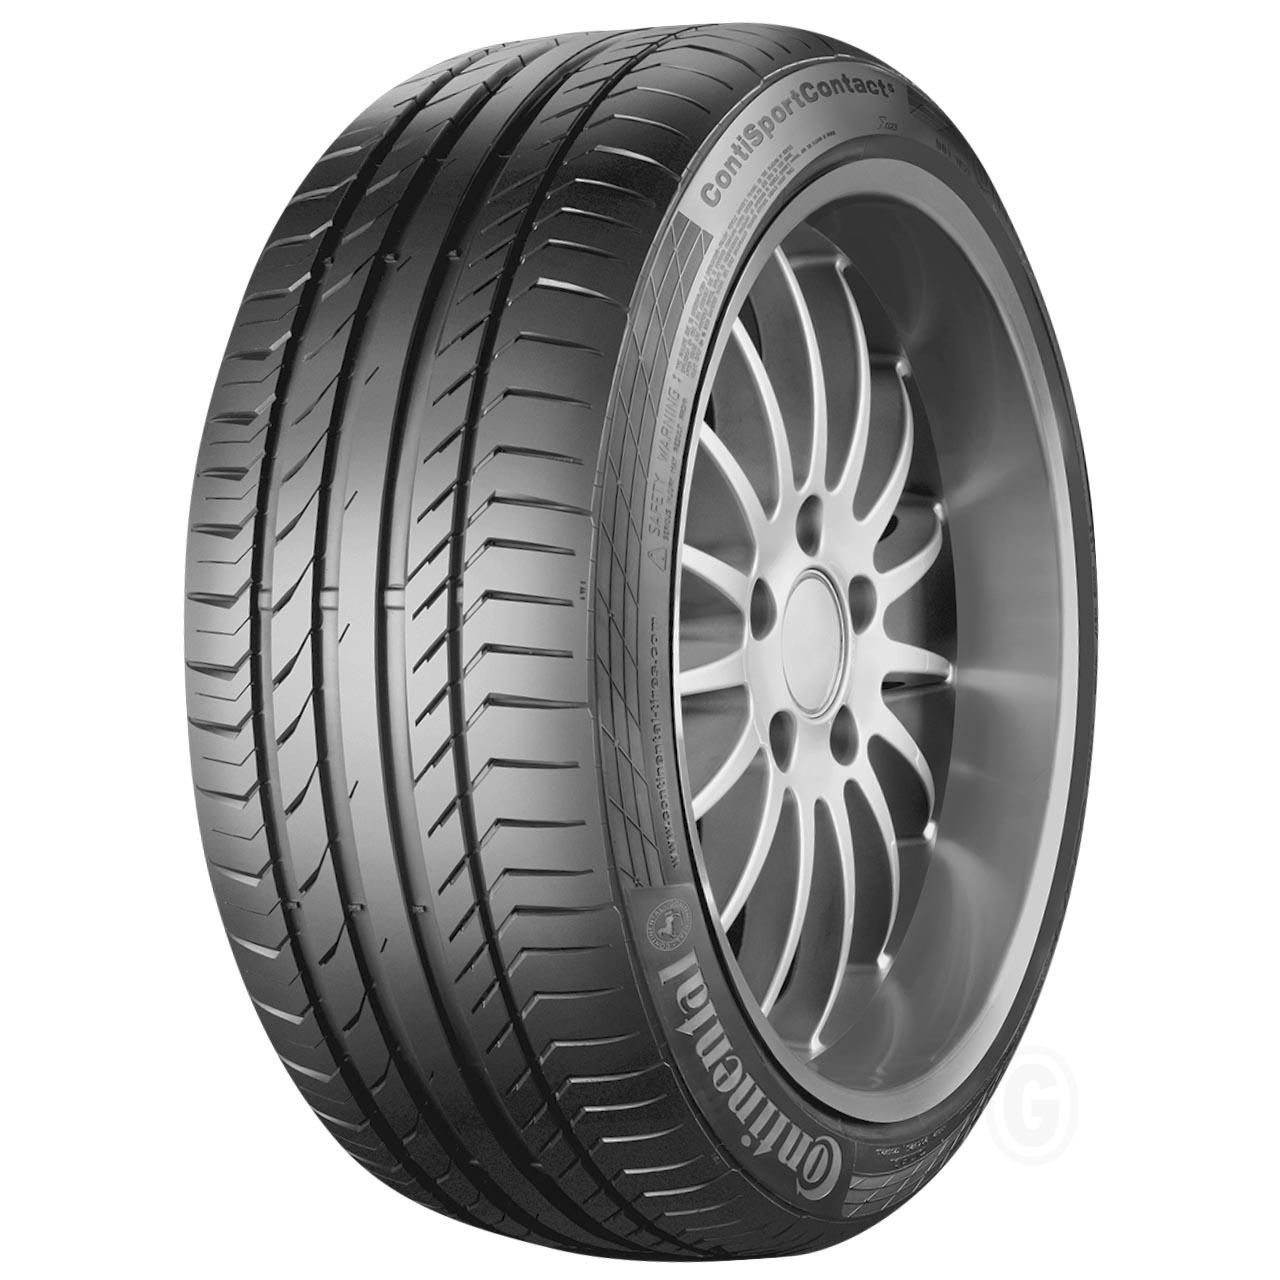 Continental CONTISPORTCONTACT 5 225/45R18 95W XL FR SEAL